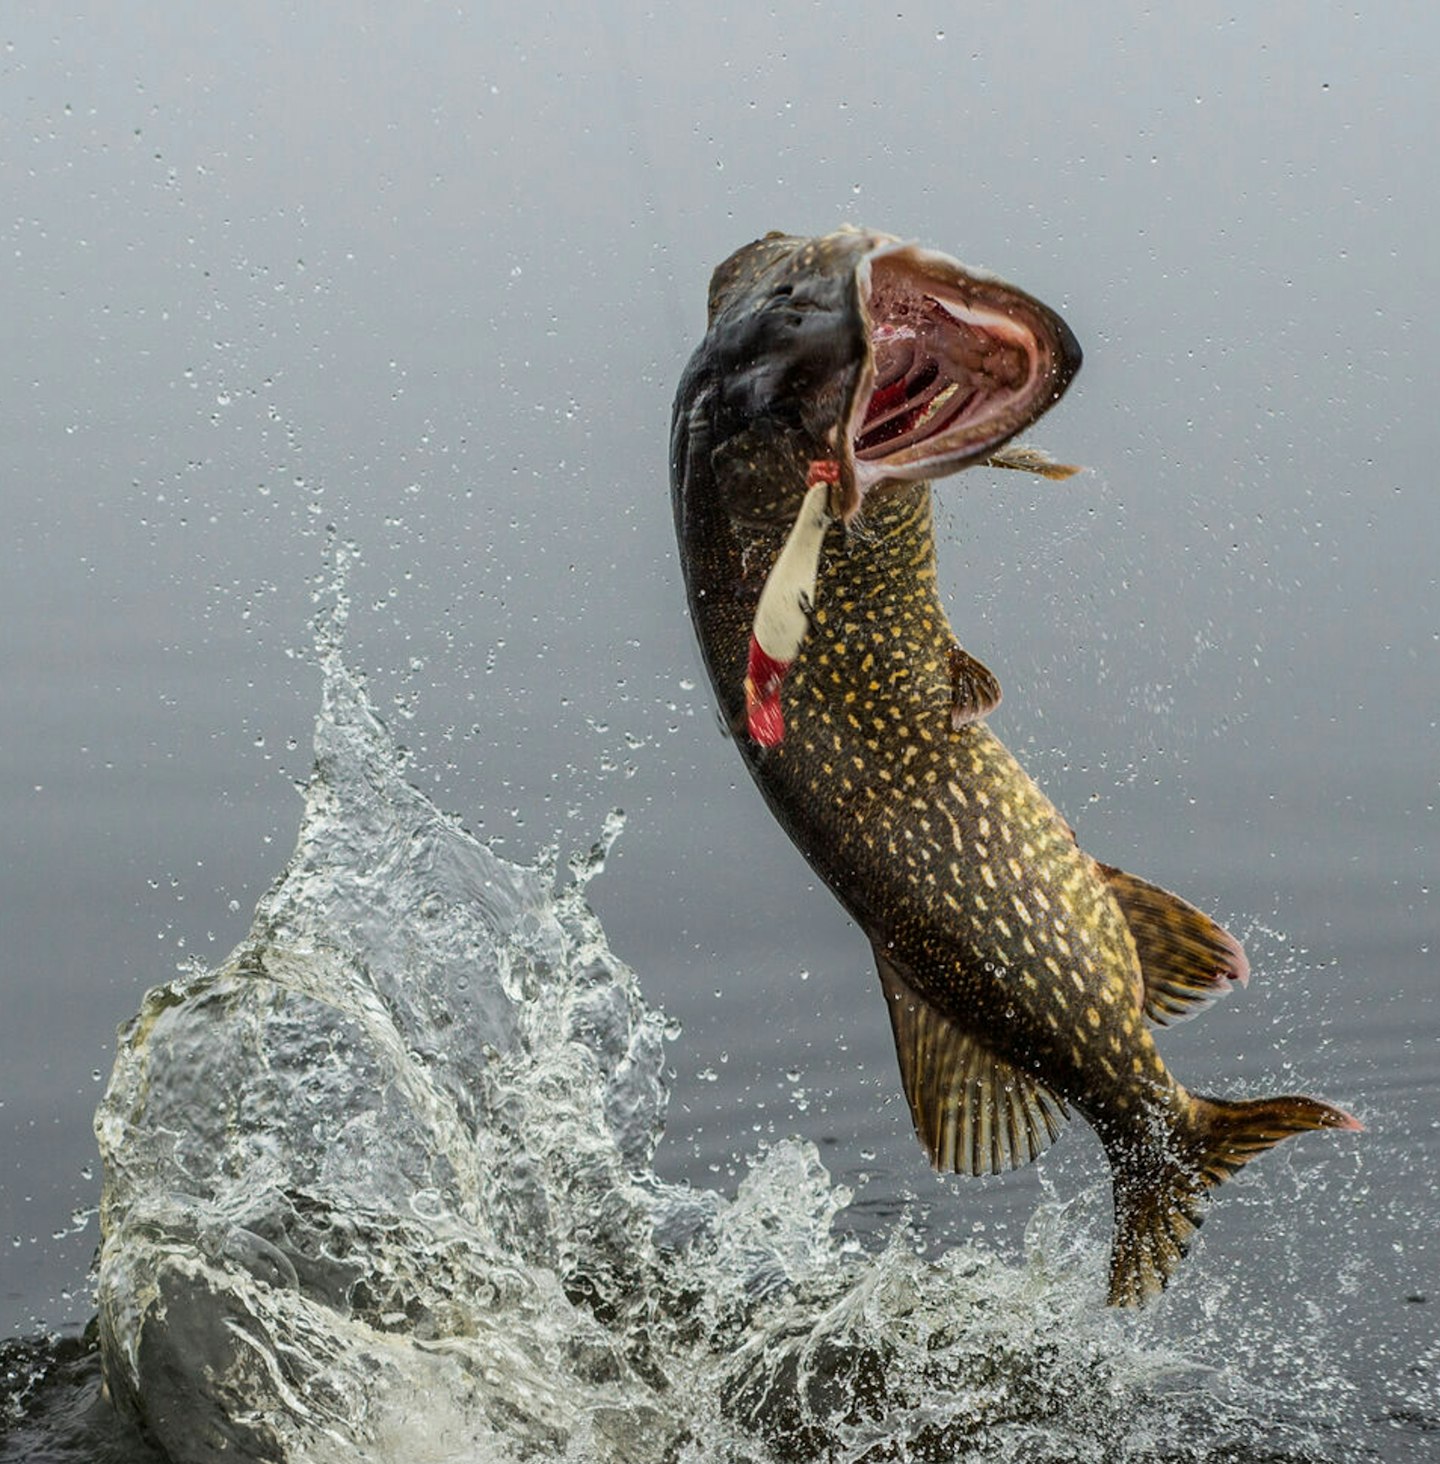 The fight of a pike is short but spectacular